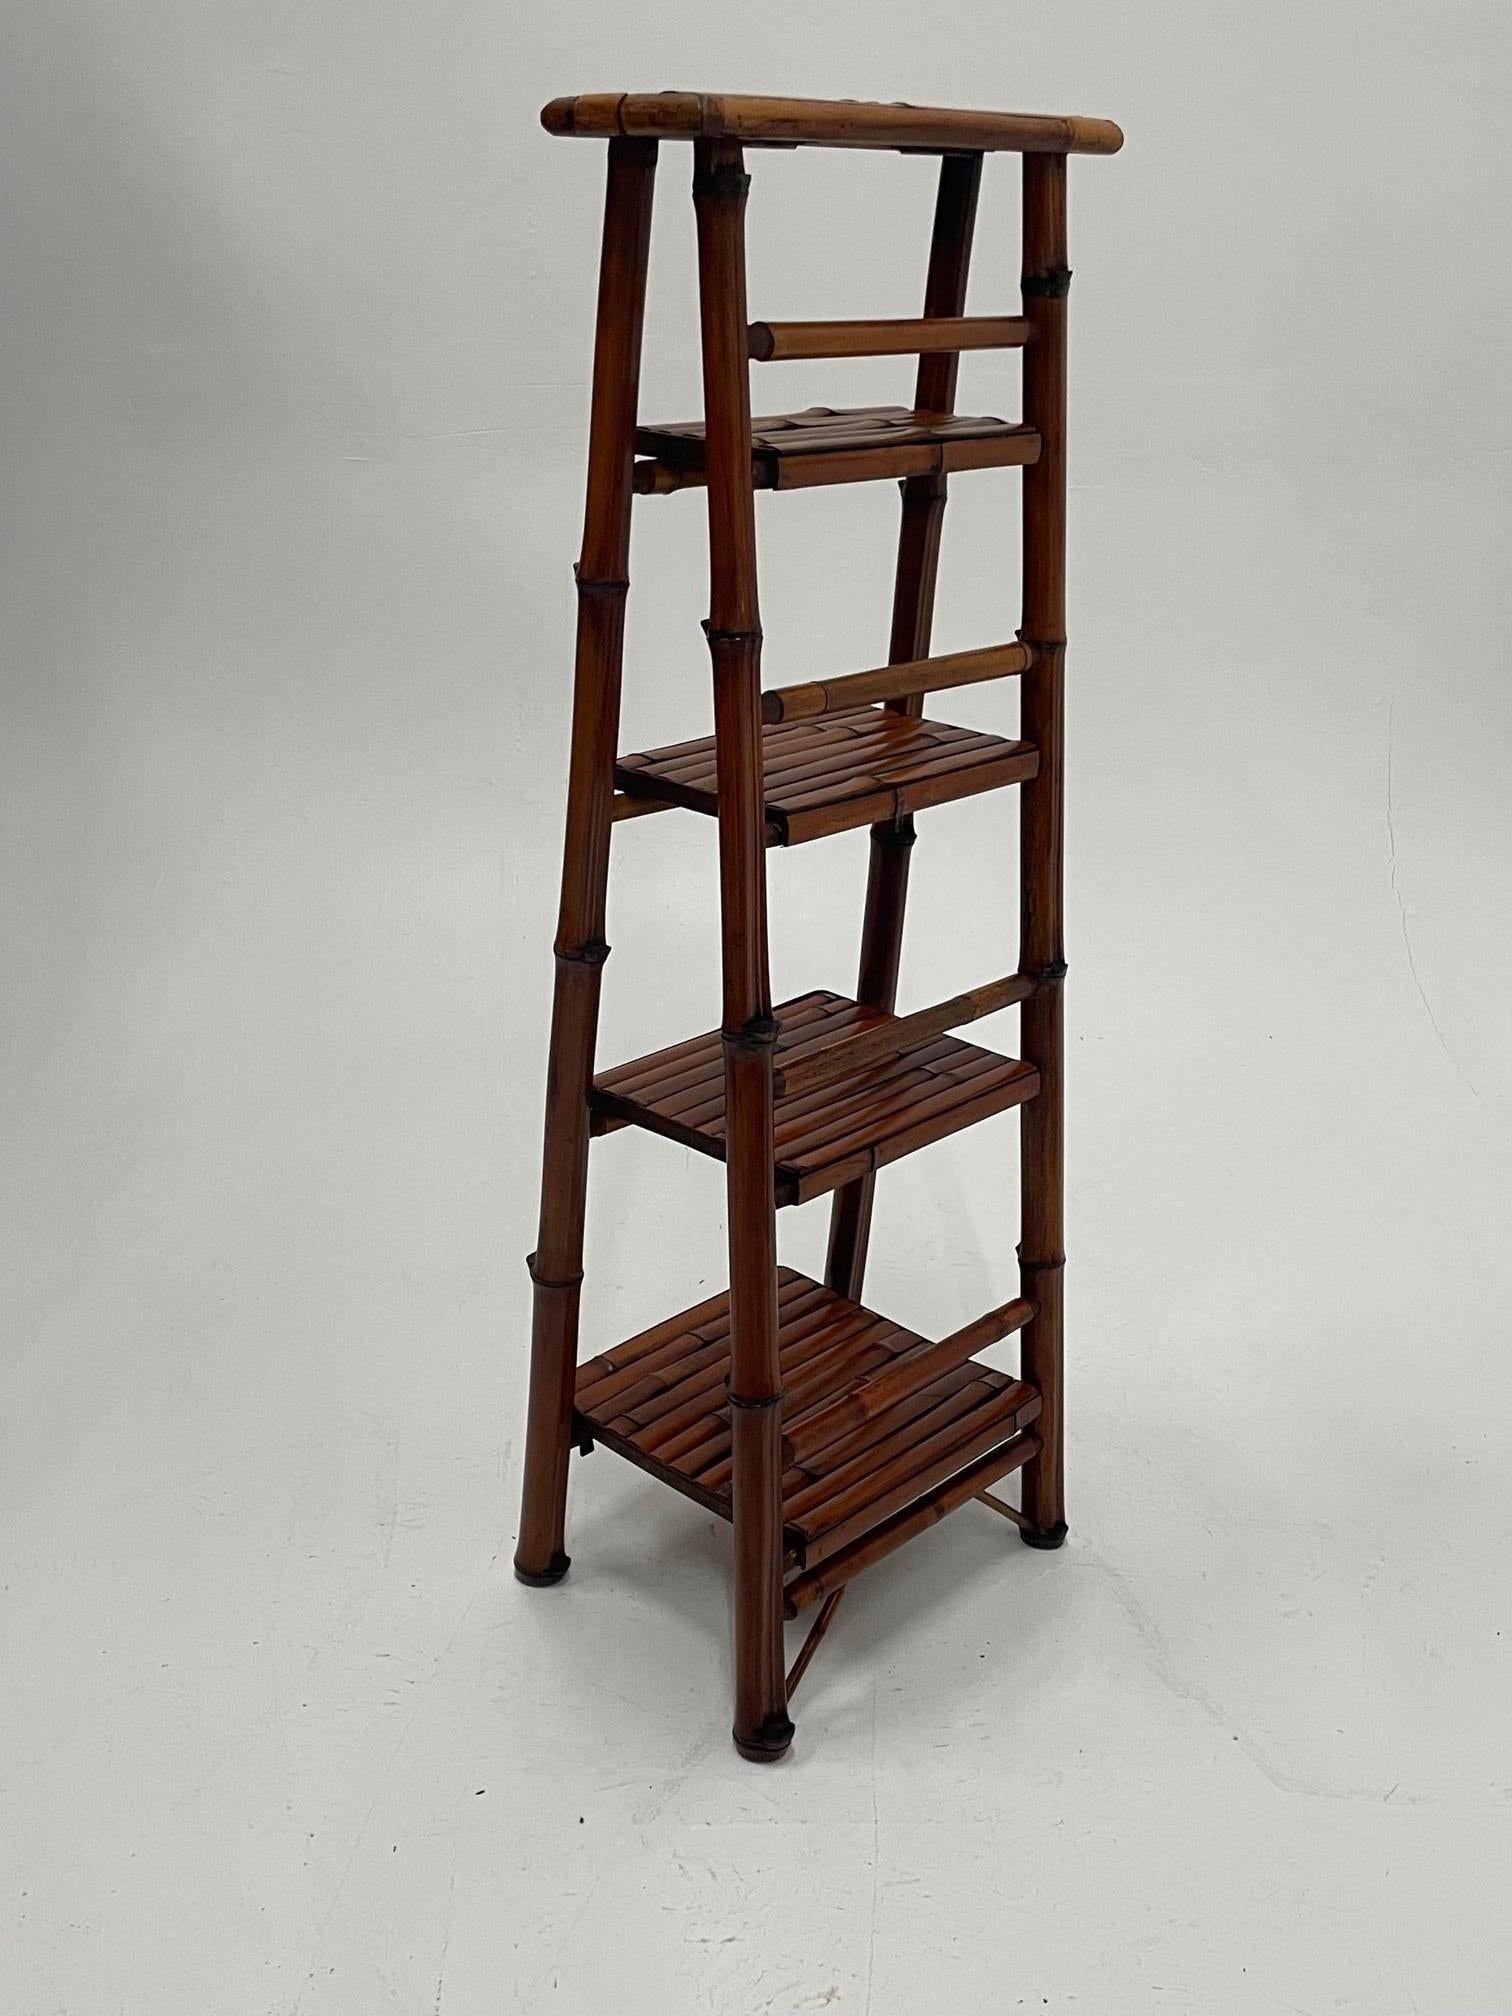 Unusual pair of versatile ladder style bamboo etageres or book shelves having 4 graduated shelves.
Depth of shelves from top to bottom, 6